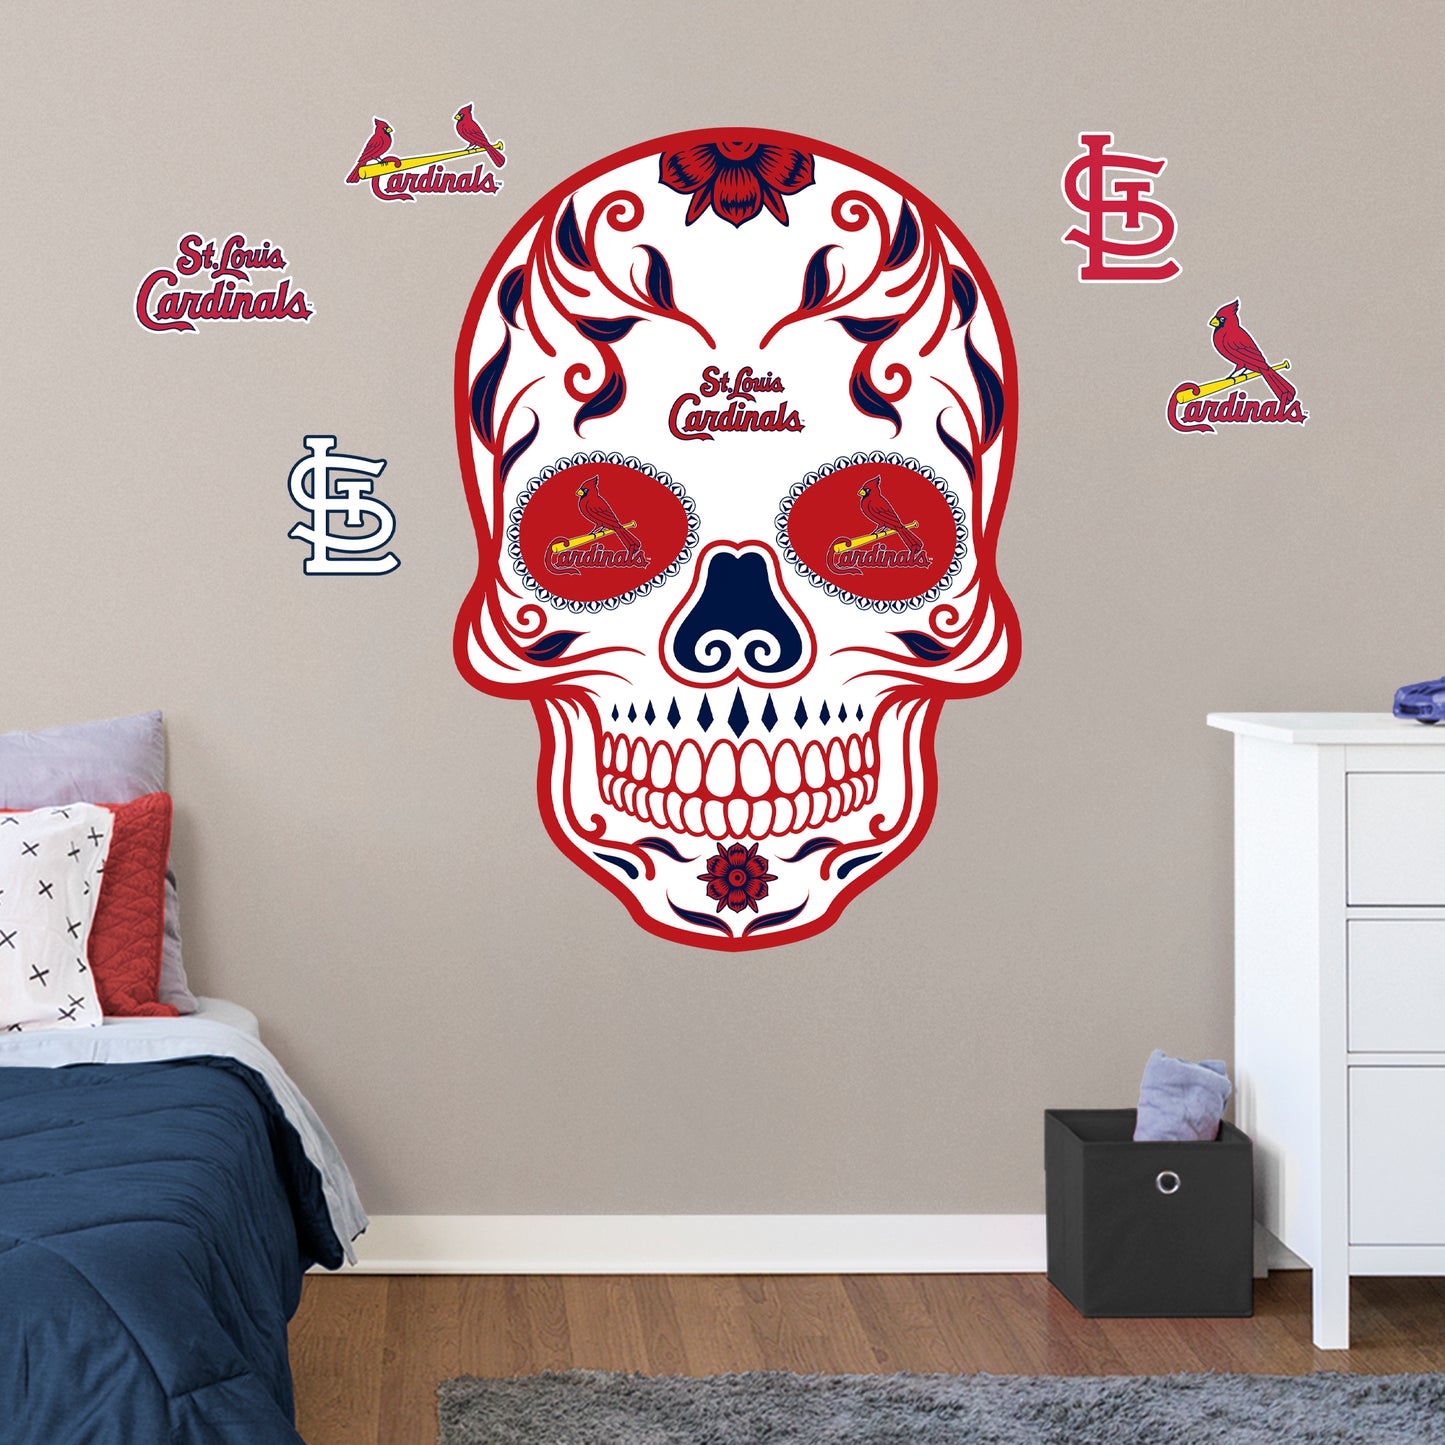 St. Louis Cardinals Stickers Baseball Stickers Sports 